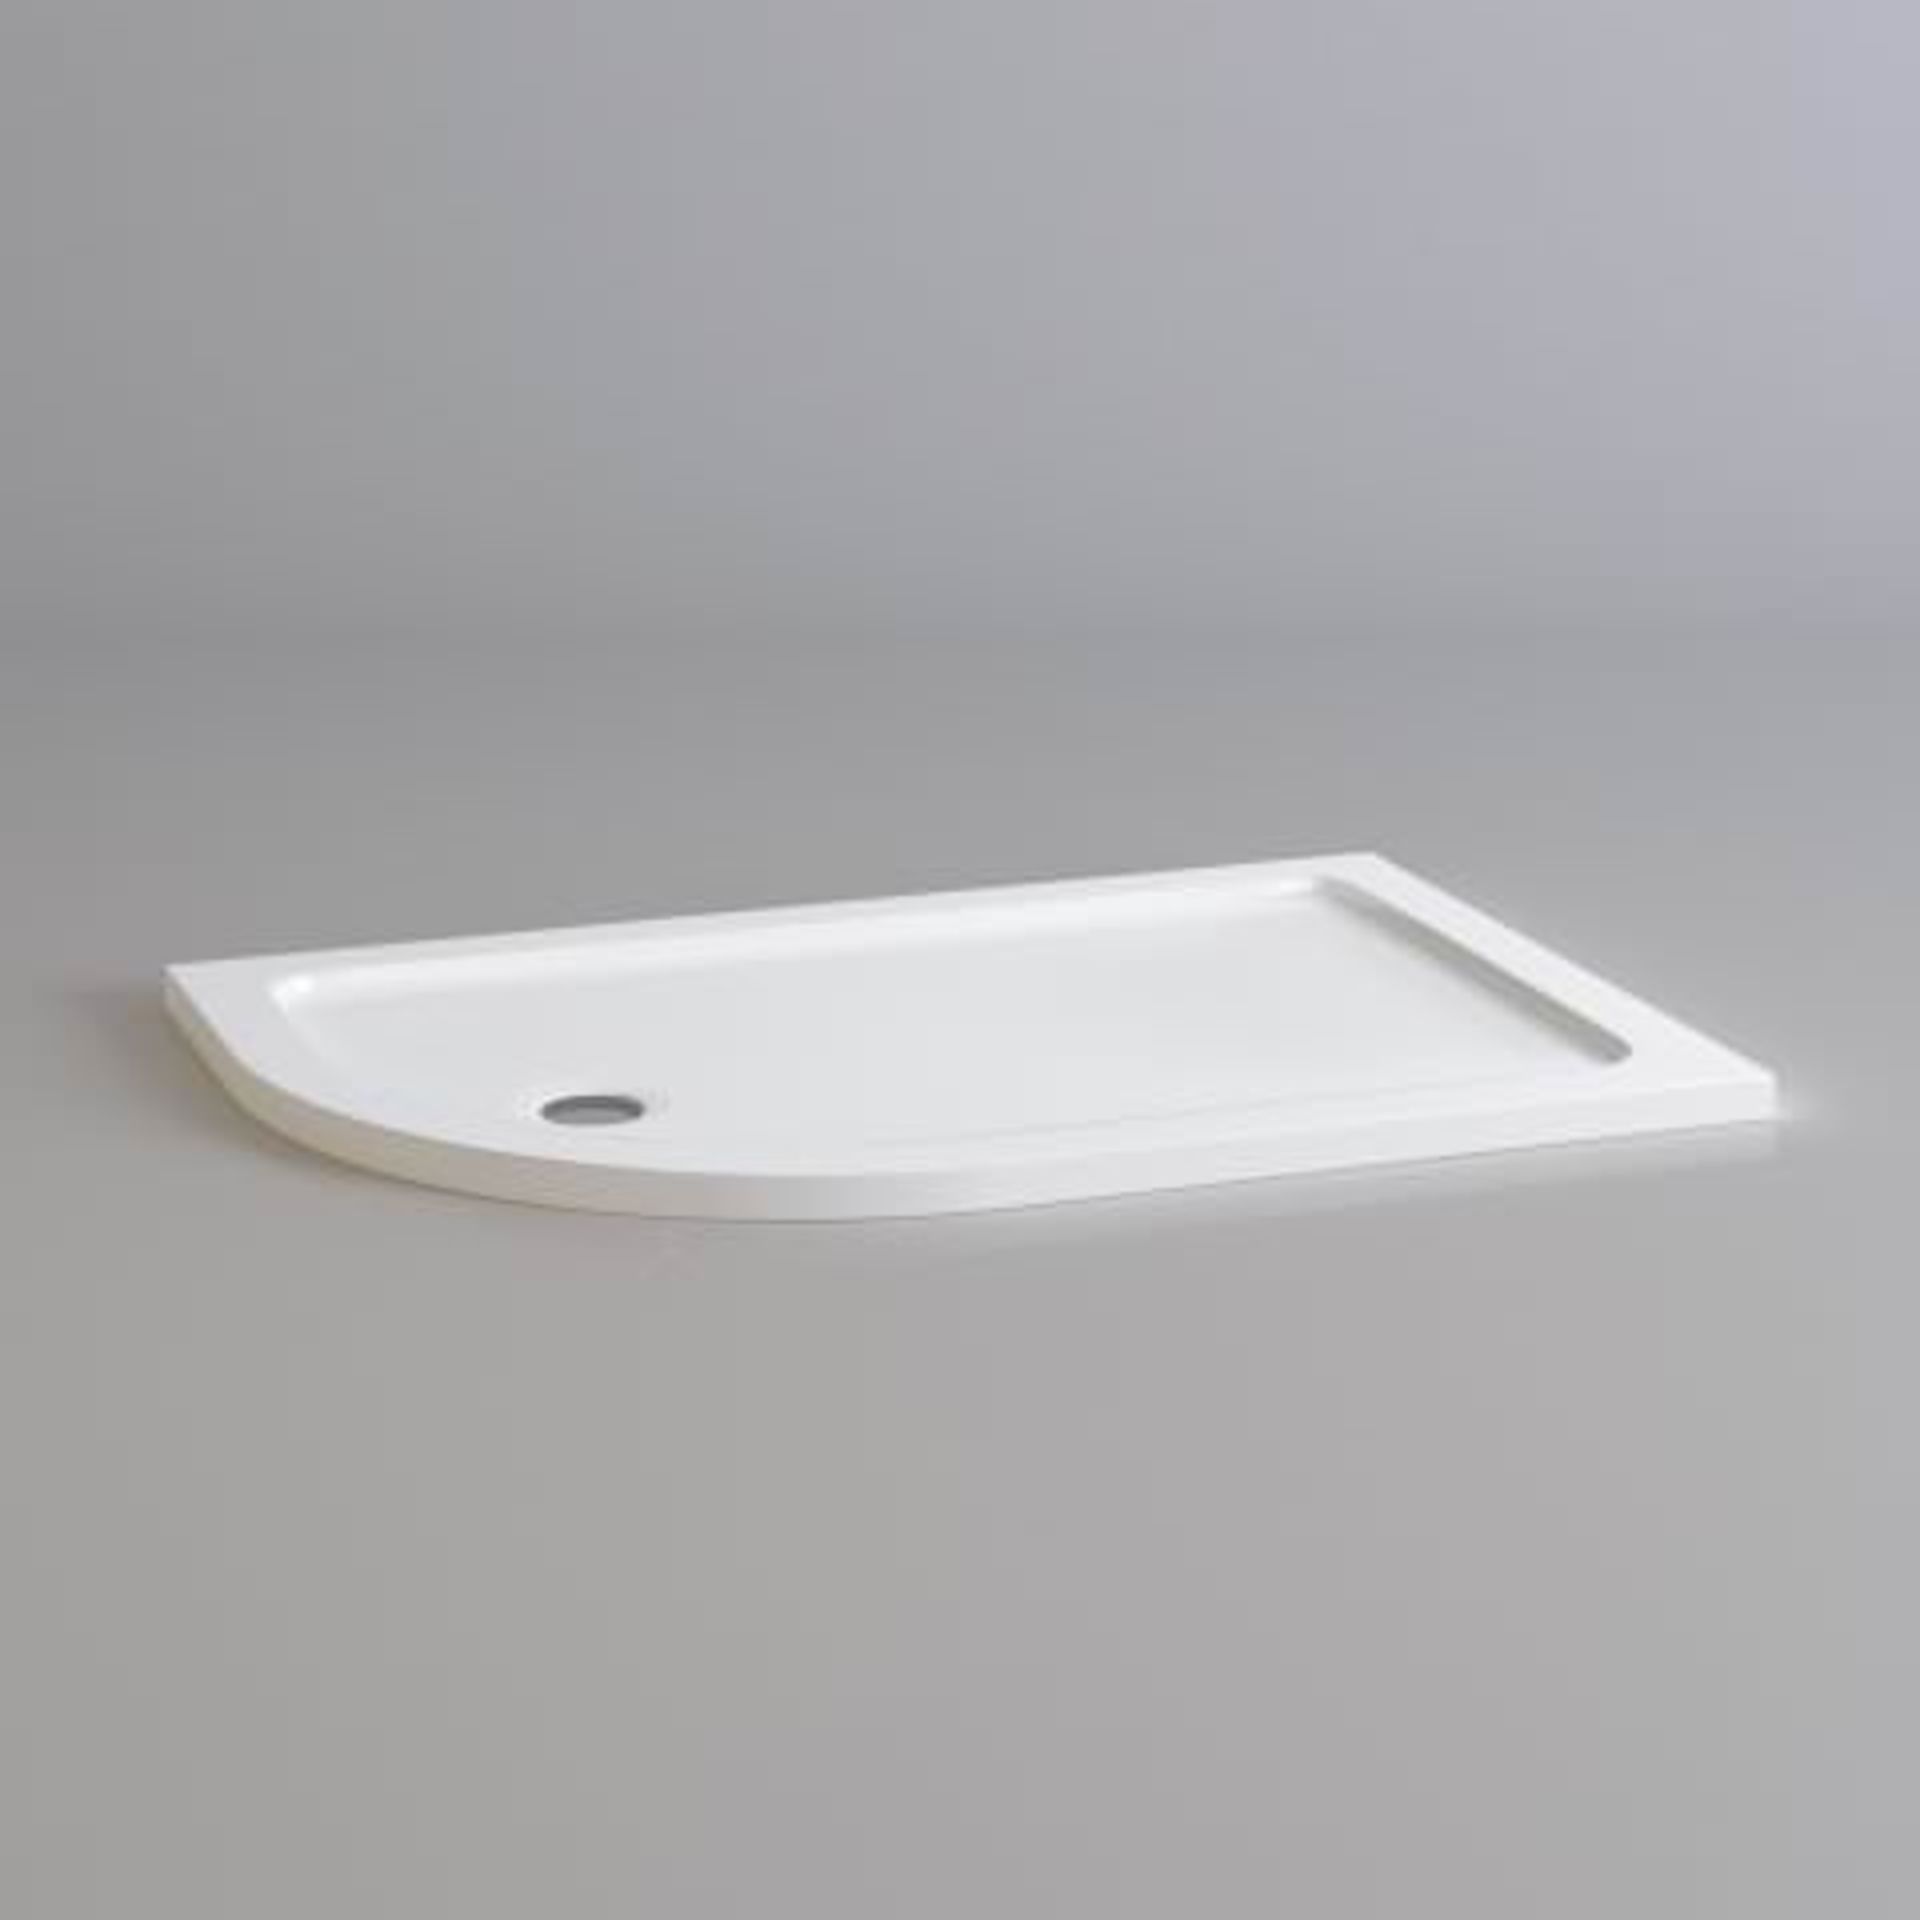 (J29) 1200x800mm Offset Quadrant Ultraslim Stone Shower Tray - Left. RRP £299.99. Magnificently